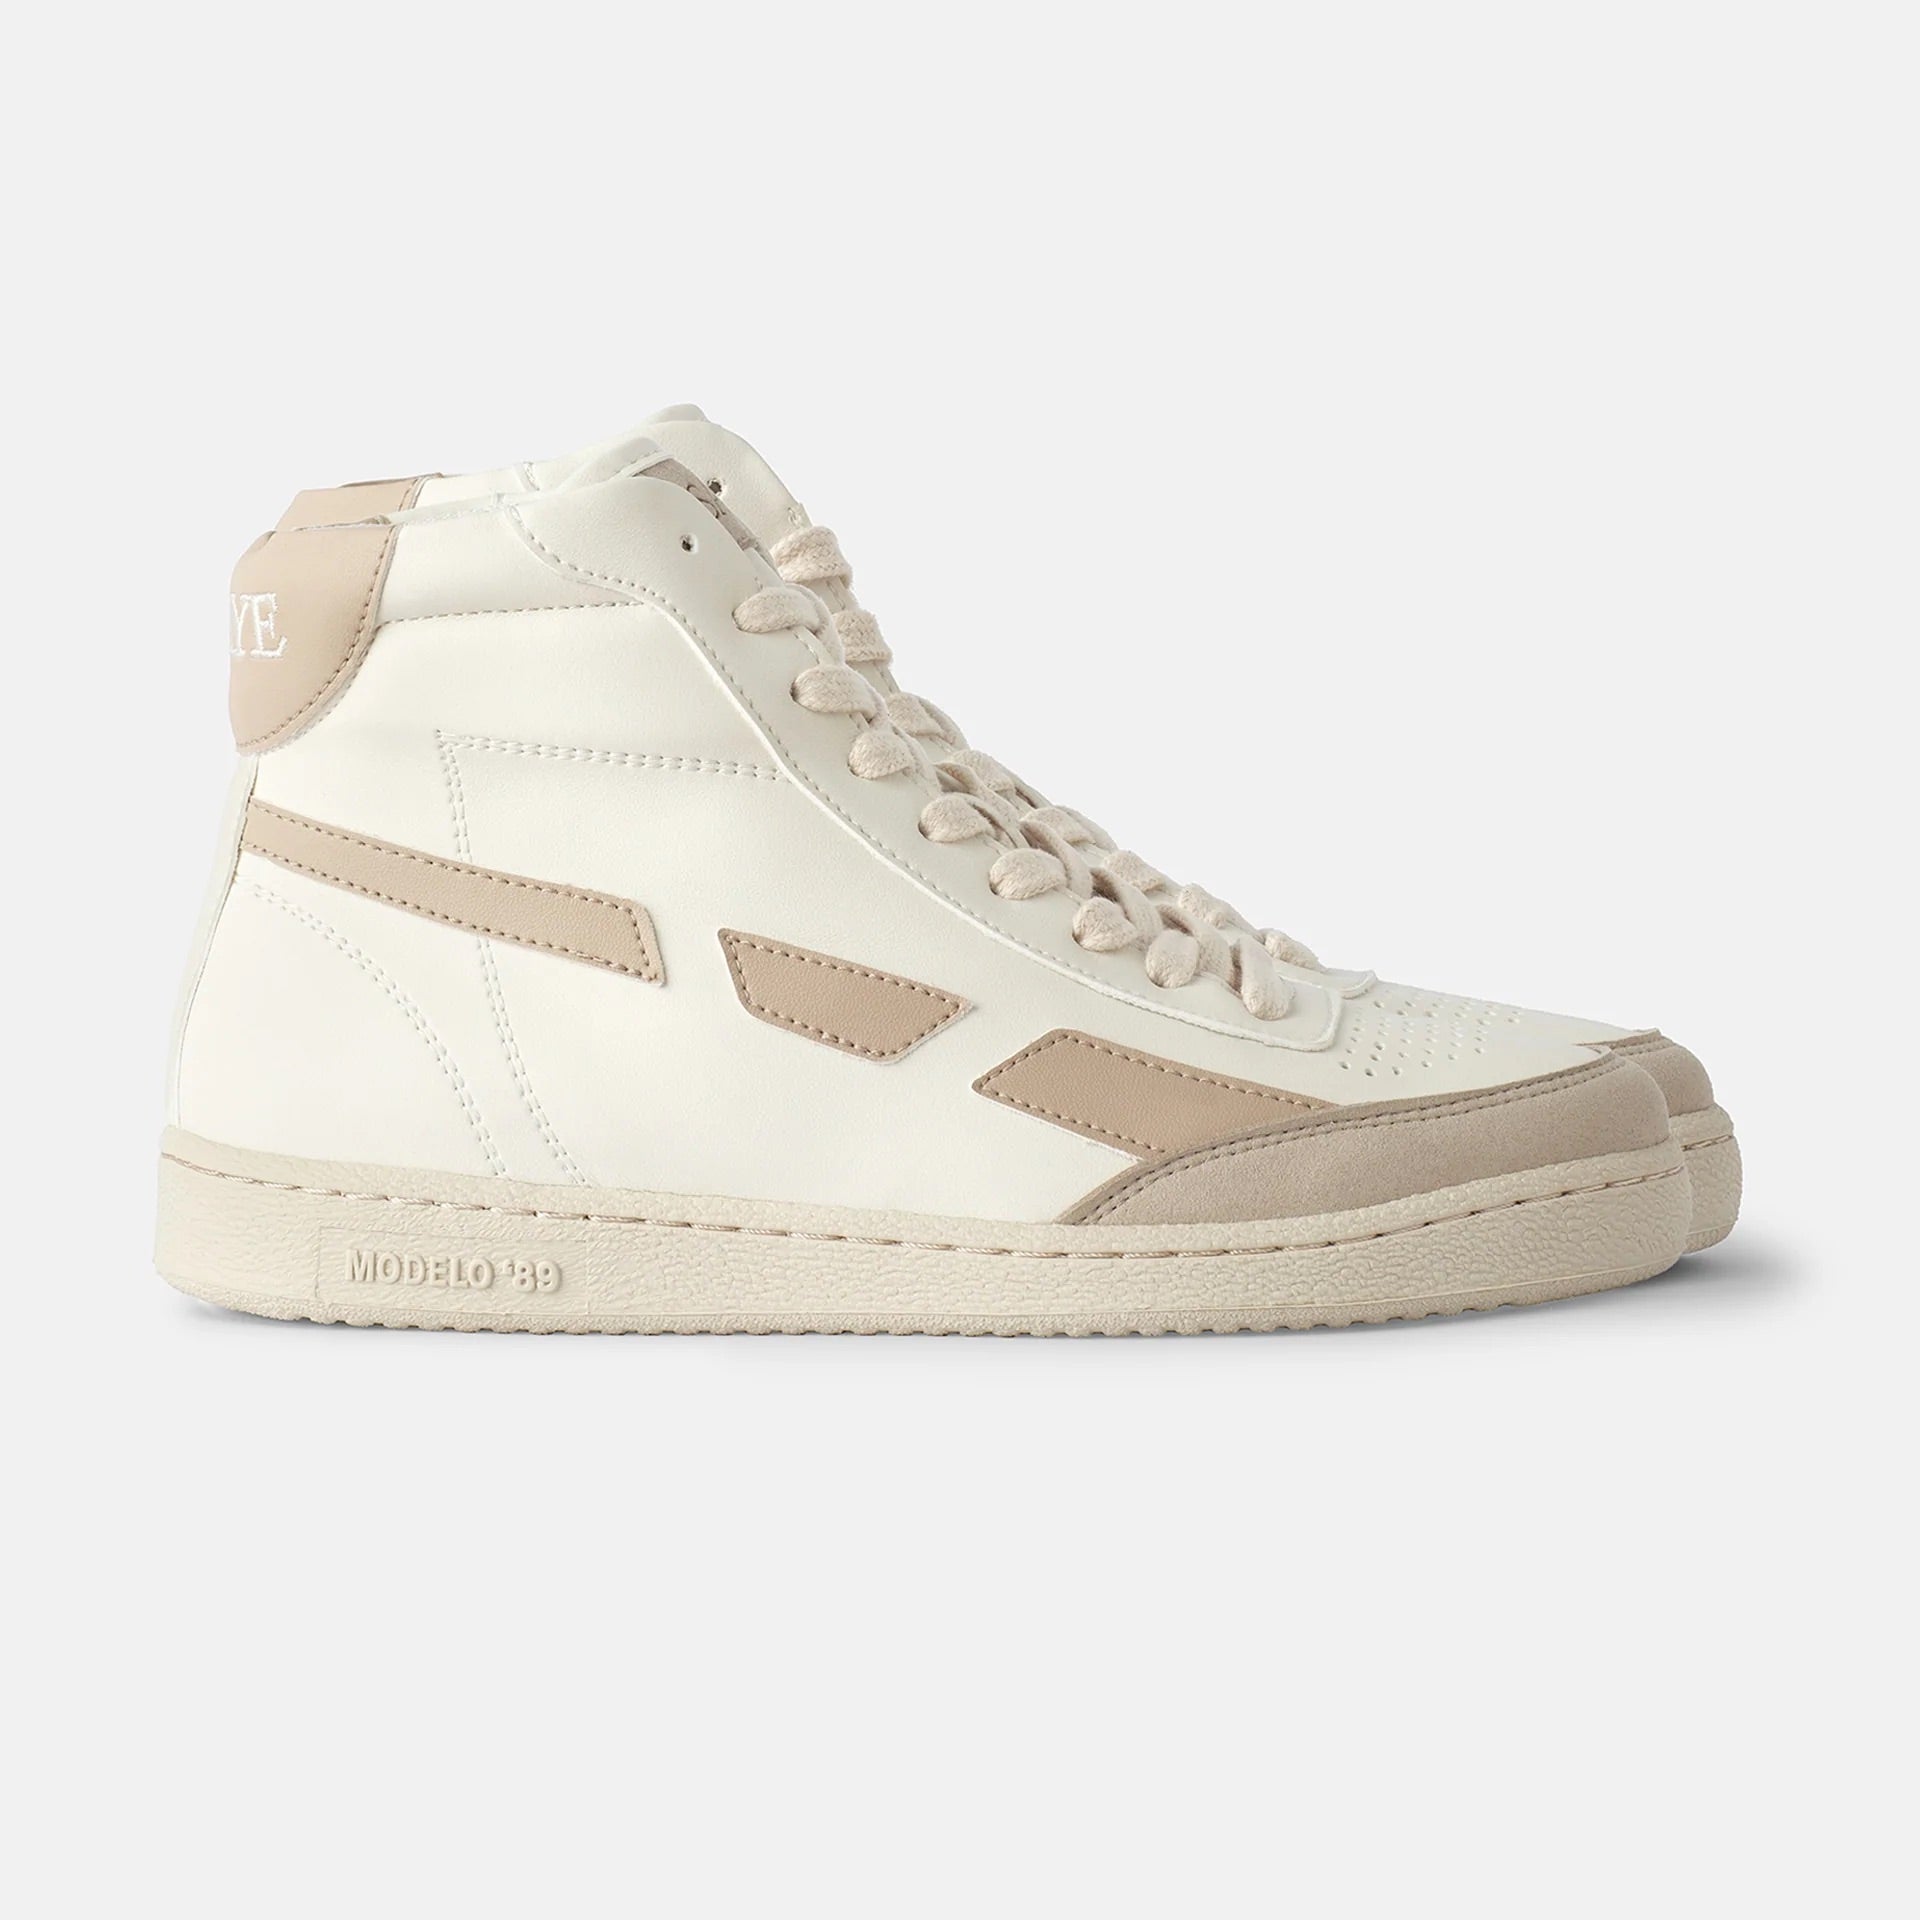 A beige high top sneaker named Modelo '89 Hi Sneakers - Beige made by SAYE, with bio-based vegan leather and featuring bamboo lining, showcased on a pristine white background.